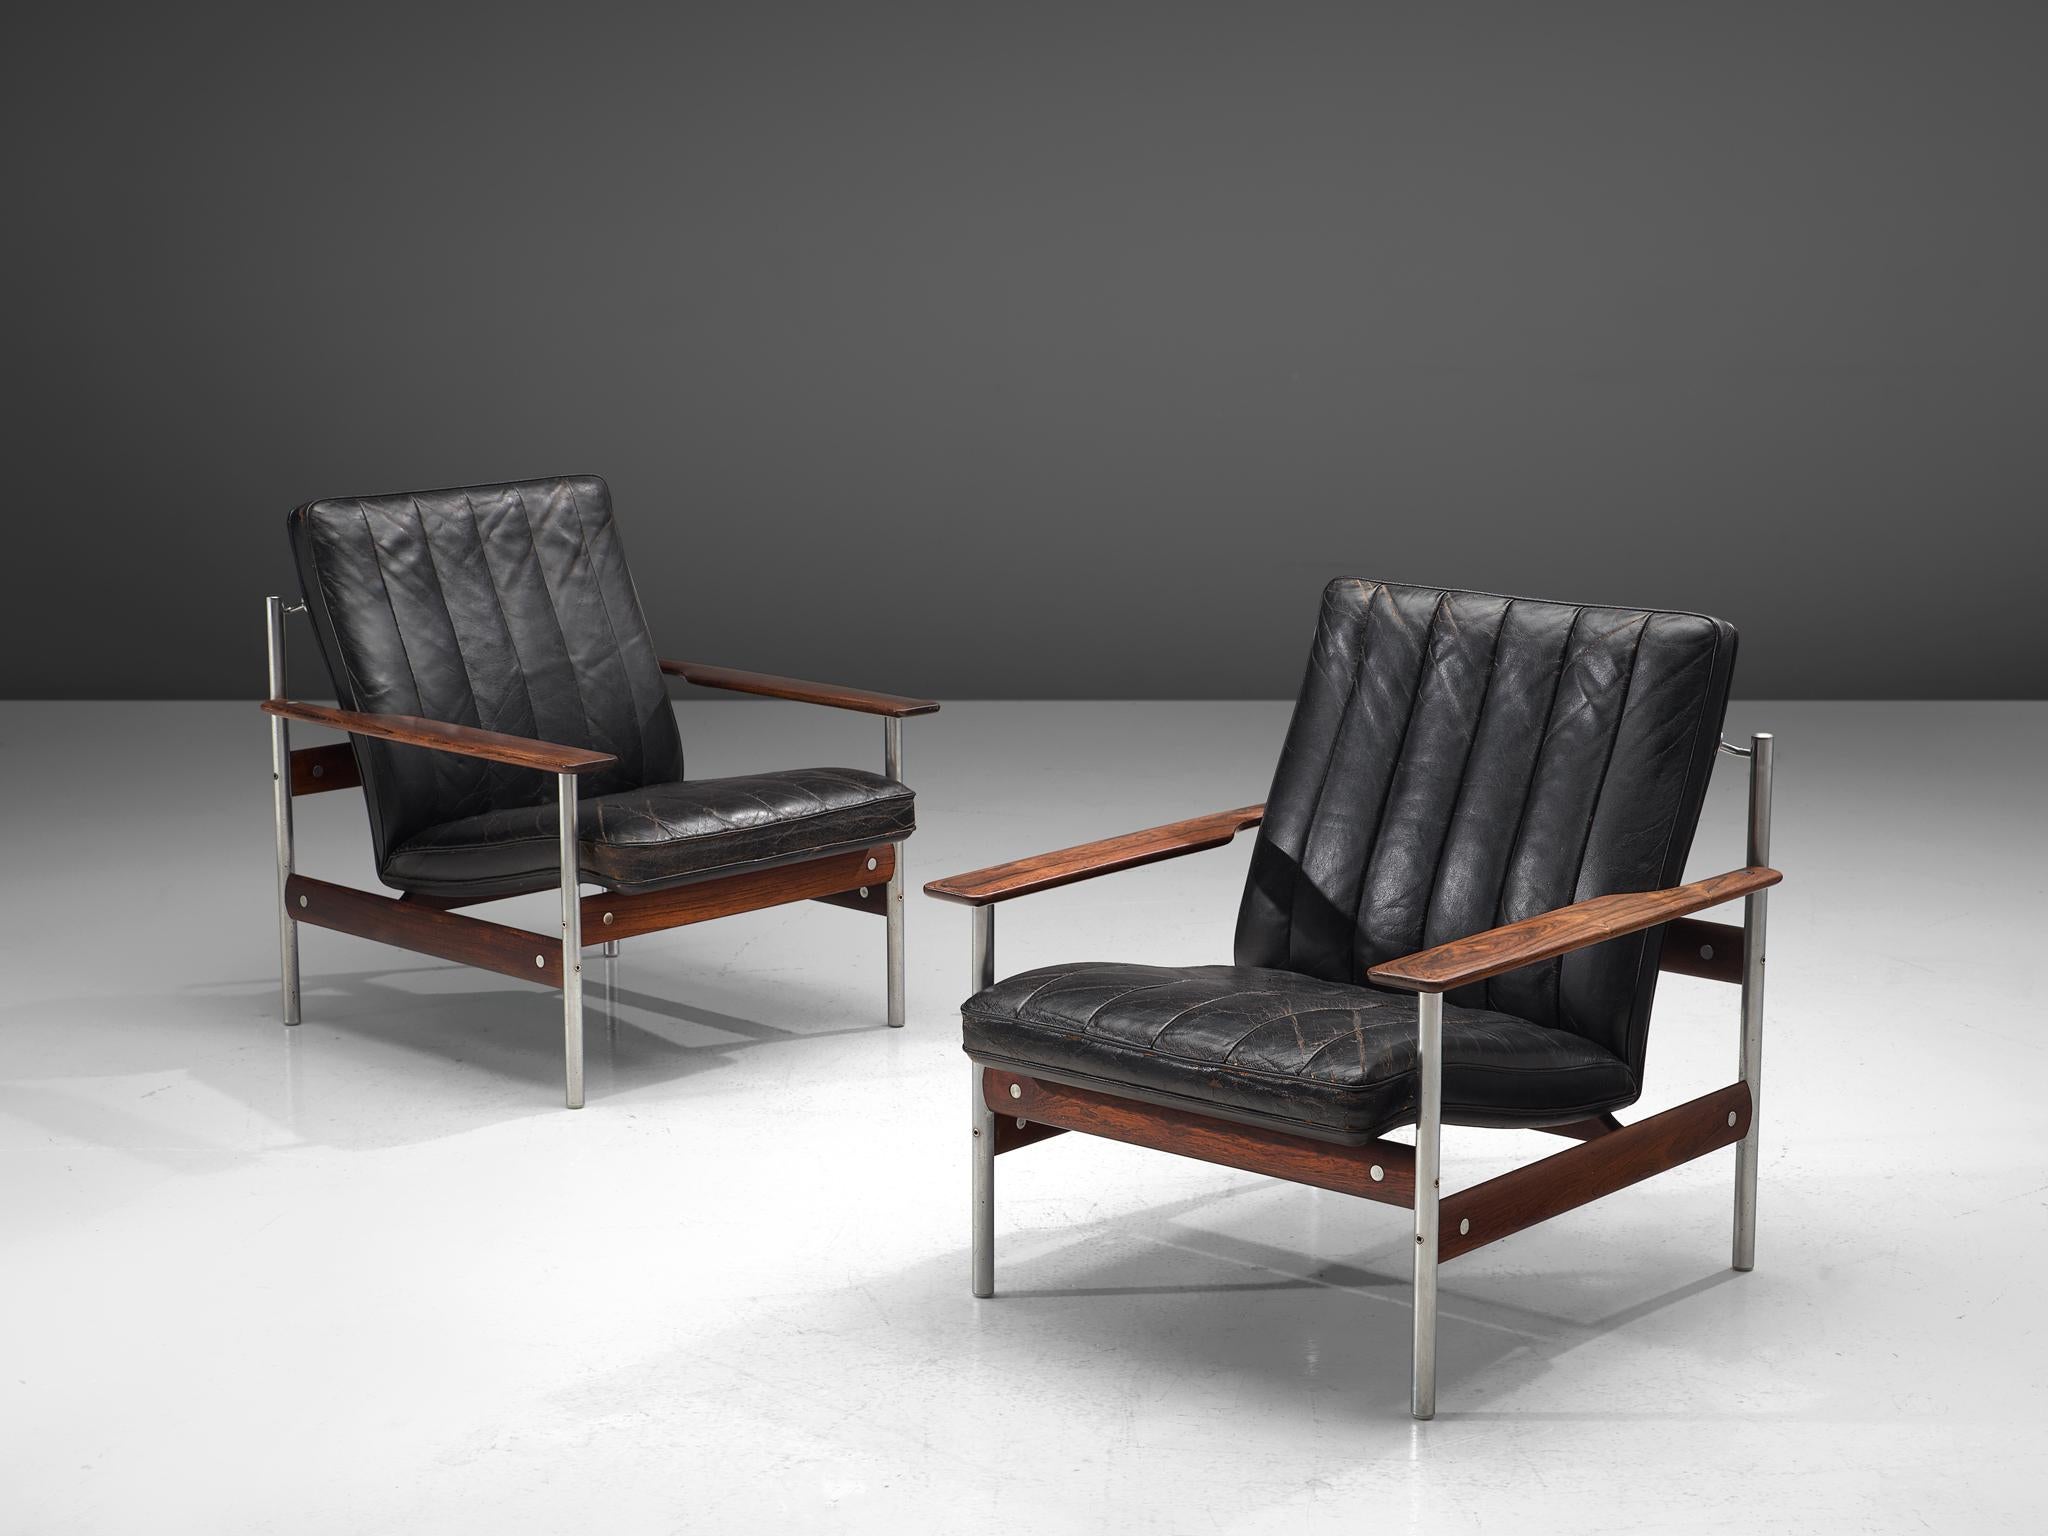 Sven Ivar Dysthe for Dokke Møbler, leather, rosewood, steel, Norway, 1959.

This set of lounge chairs is designed by Sven Ivar Dysthe for Dokke Møbler. The frame of these armchairs is executed in rosewood and the legs are made out of stainless